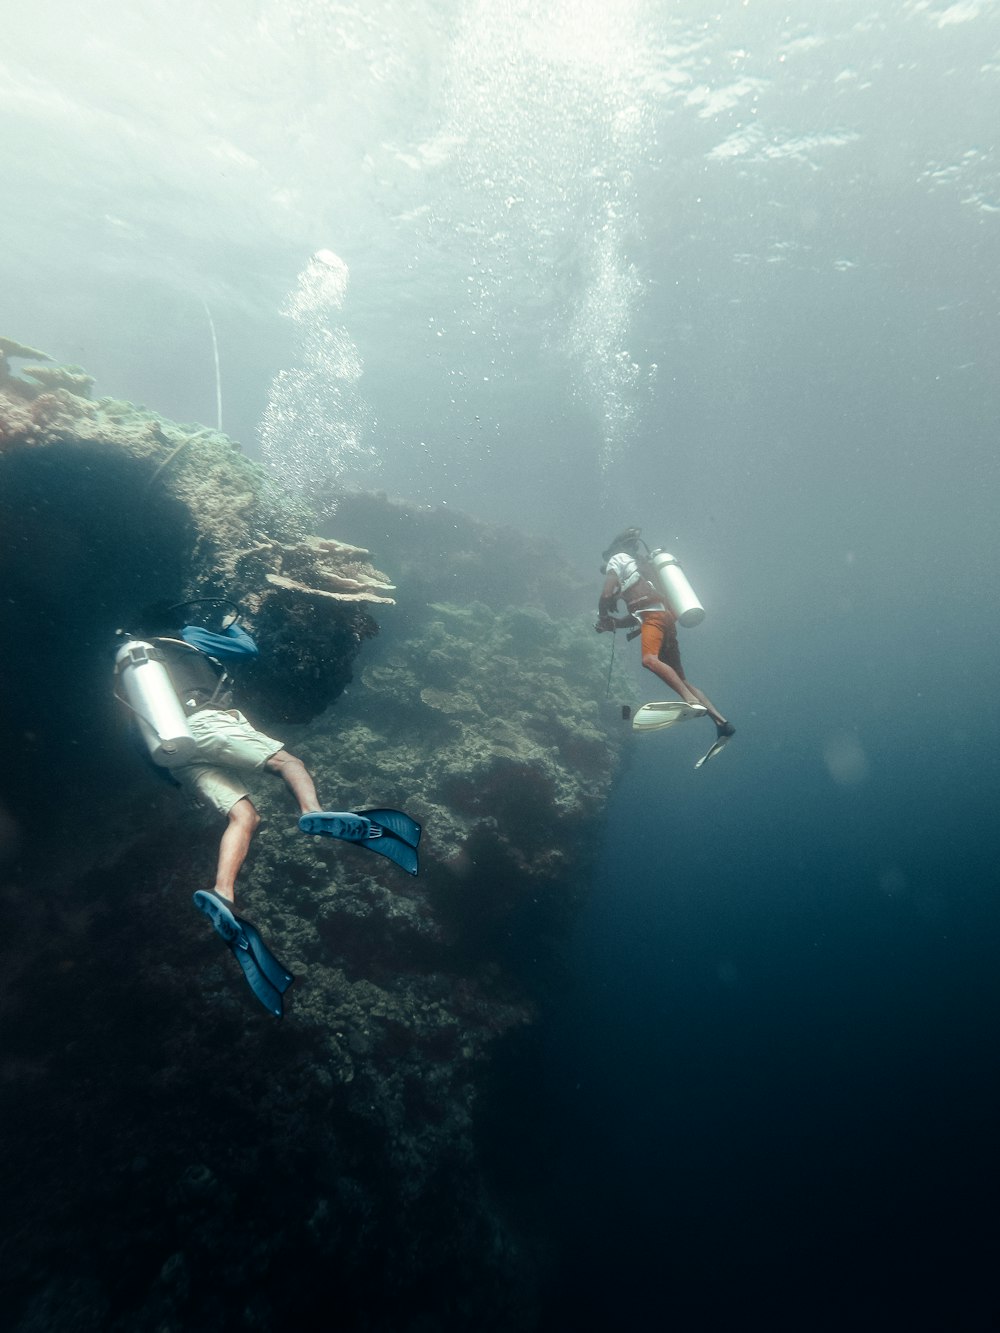 two people diving in the ocean with scuba gear